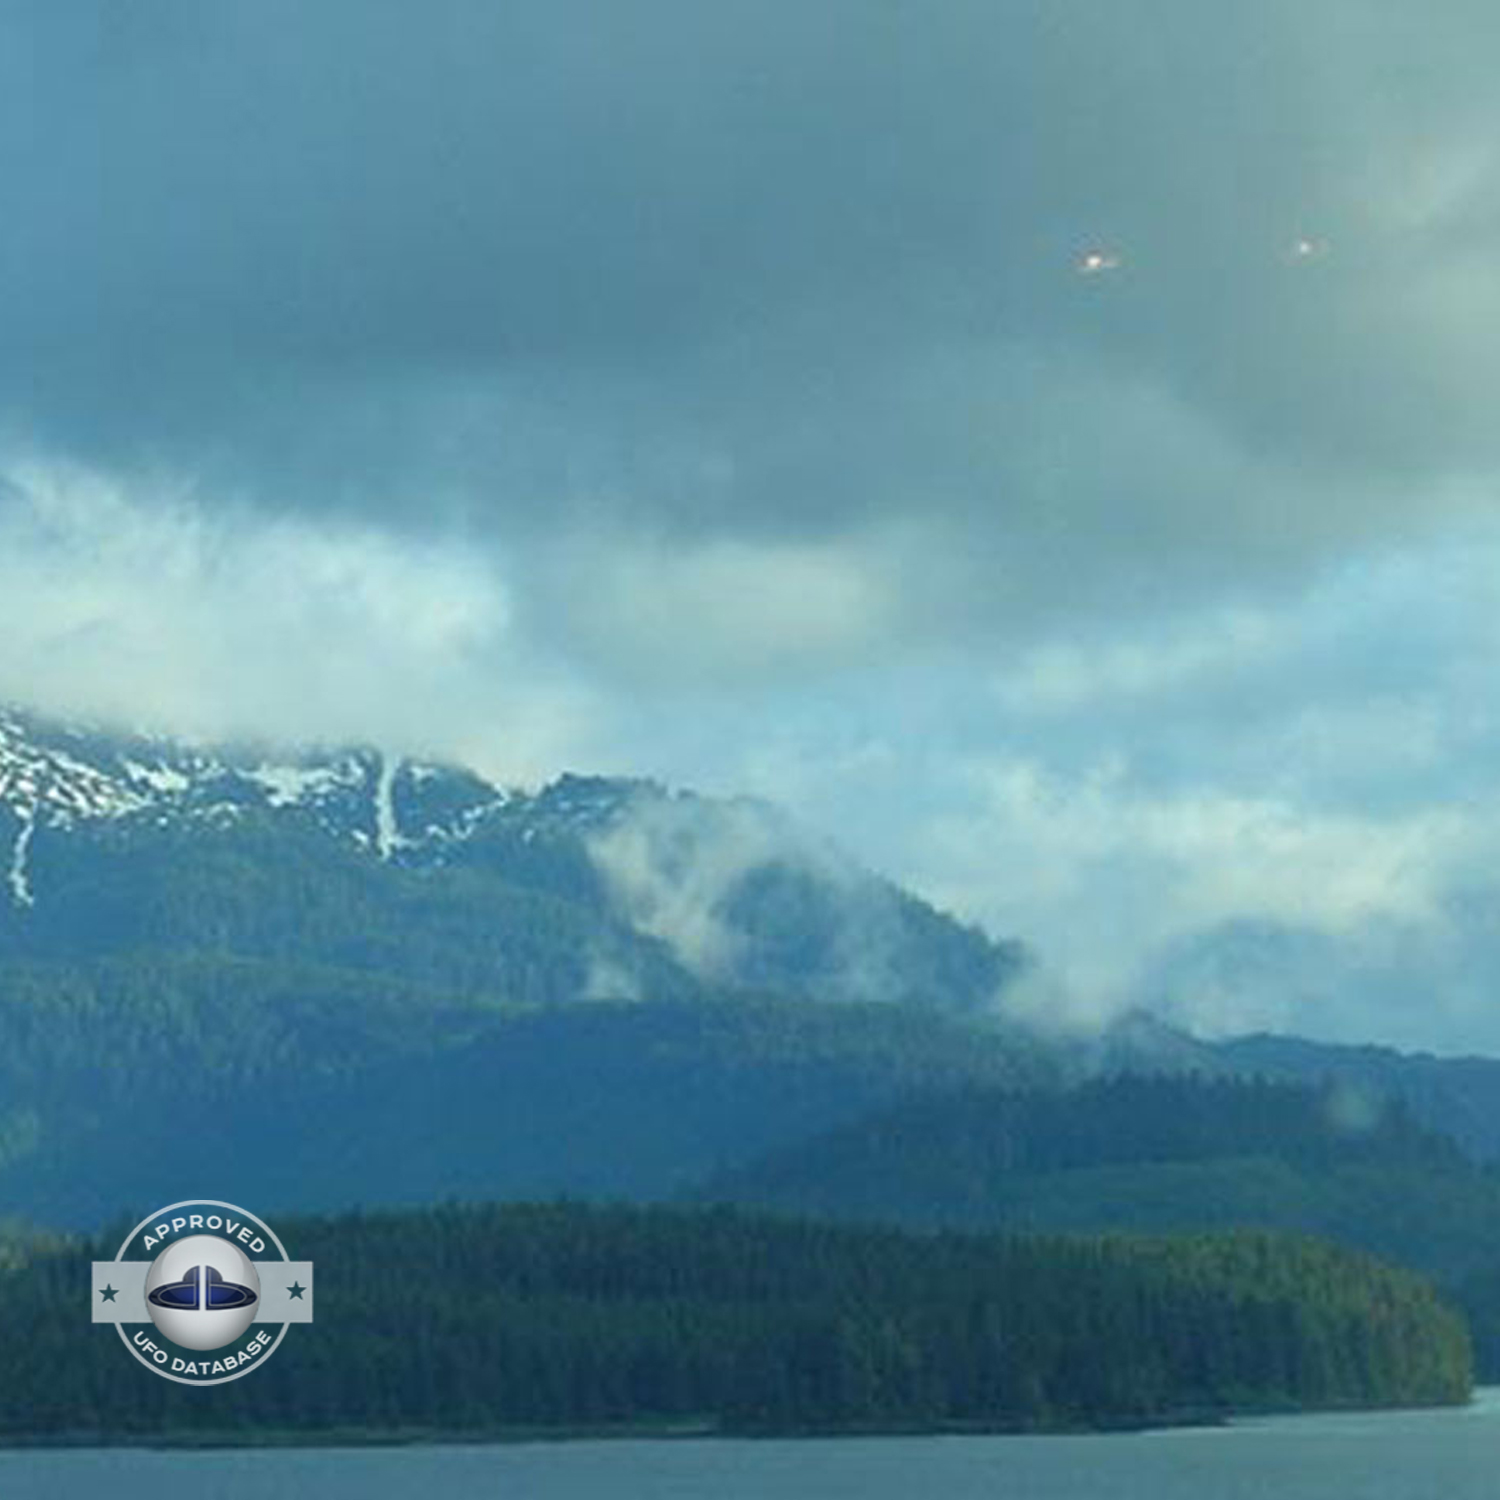 UFO Picture shot on boat on a Princess Cruise to Alaska - June 2006 UFO Picture #95-2